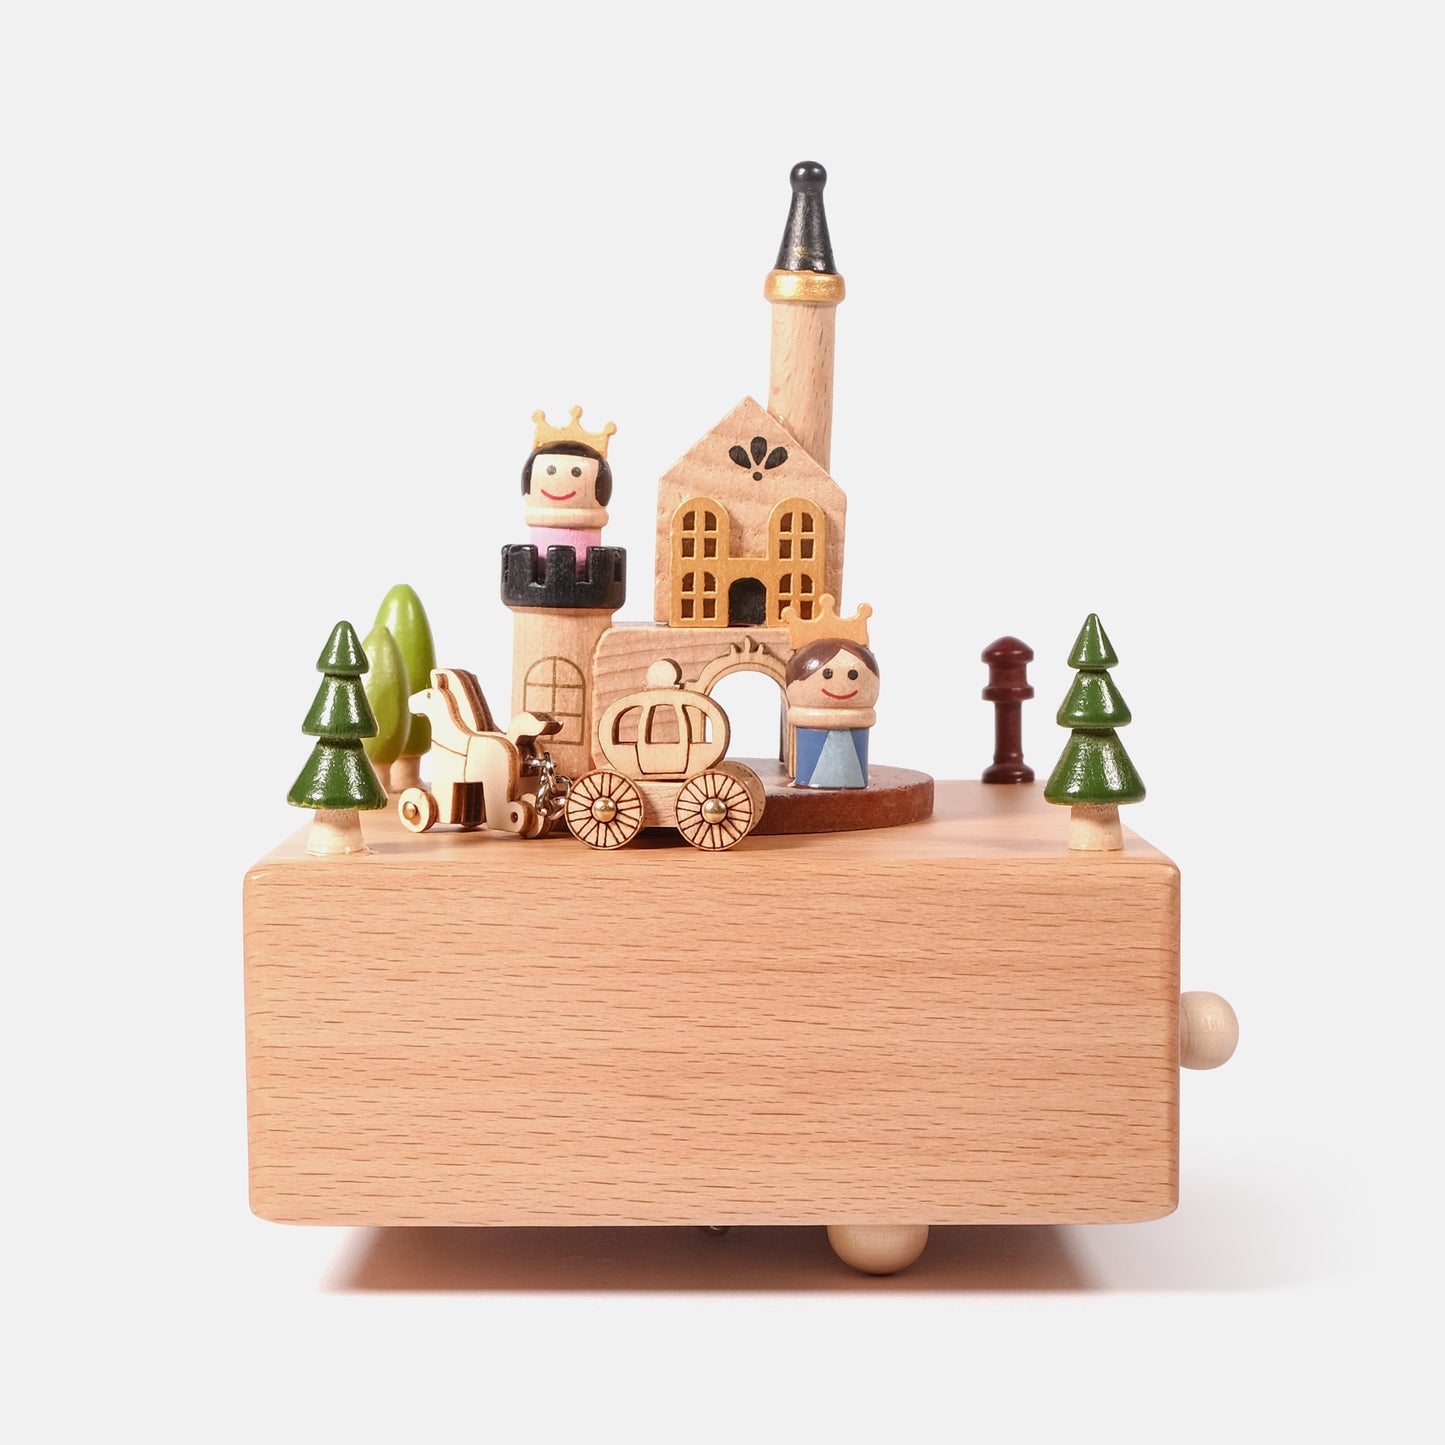 Personalized Wooden Music Box - The Princess and Prince